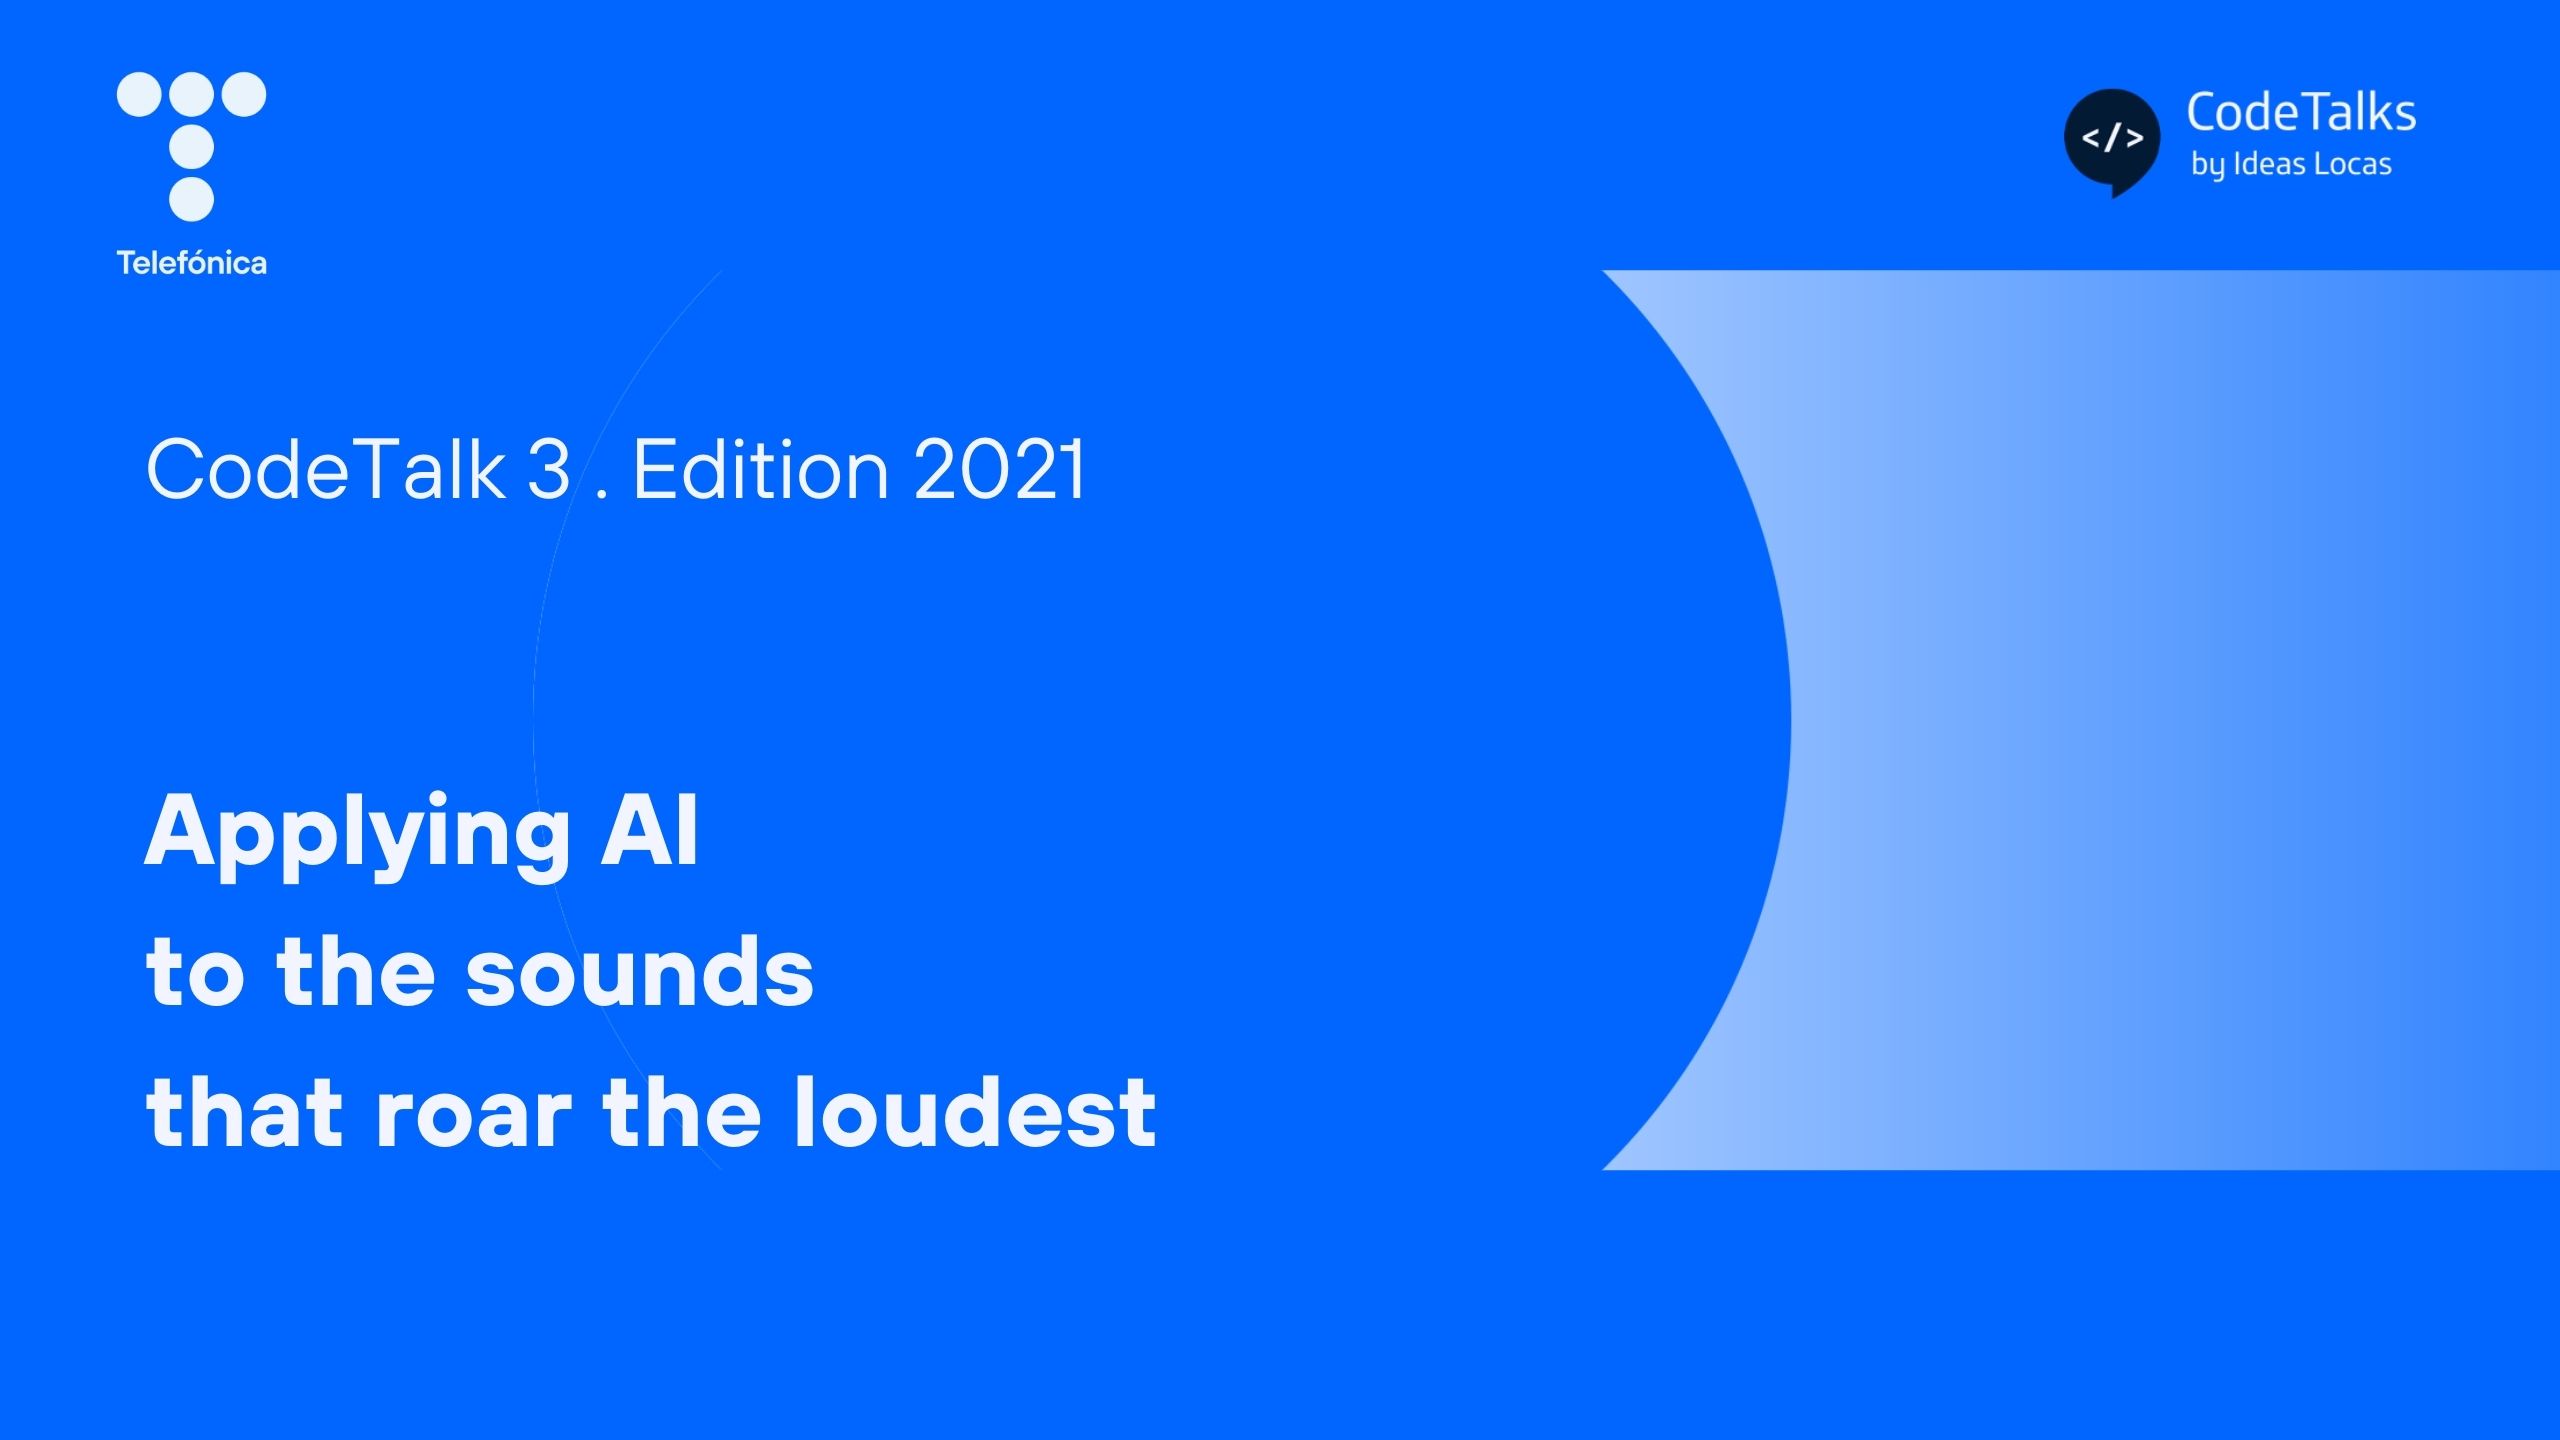 Applying AI to the sounds that roar the loudest